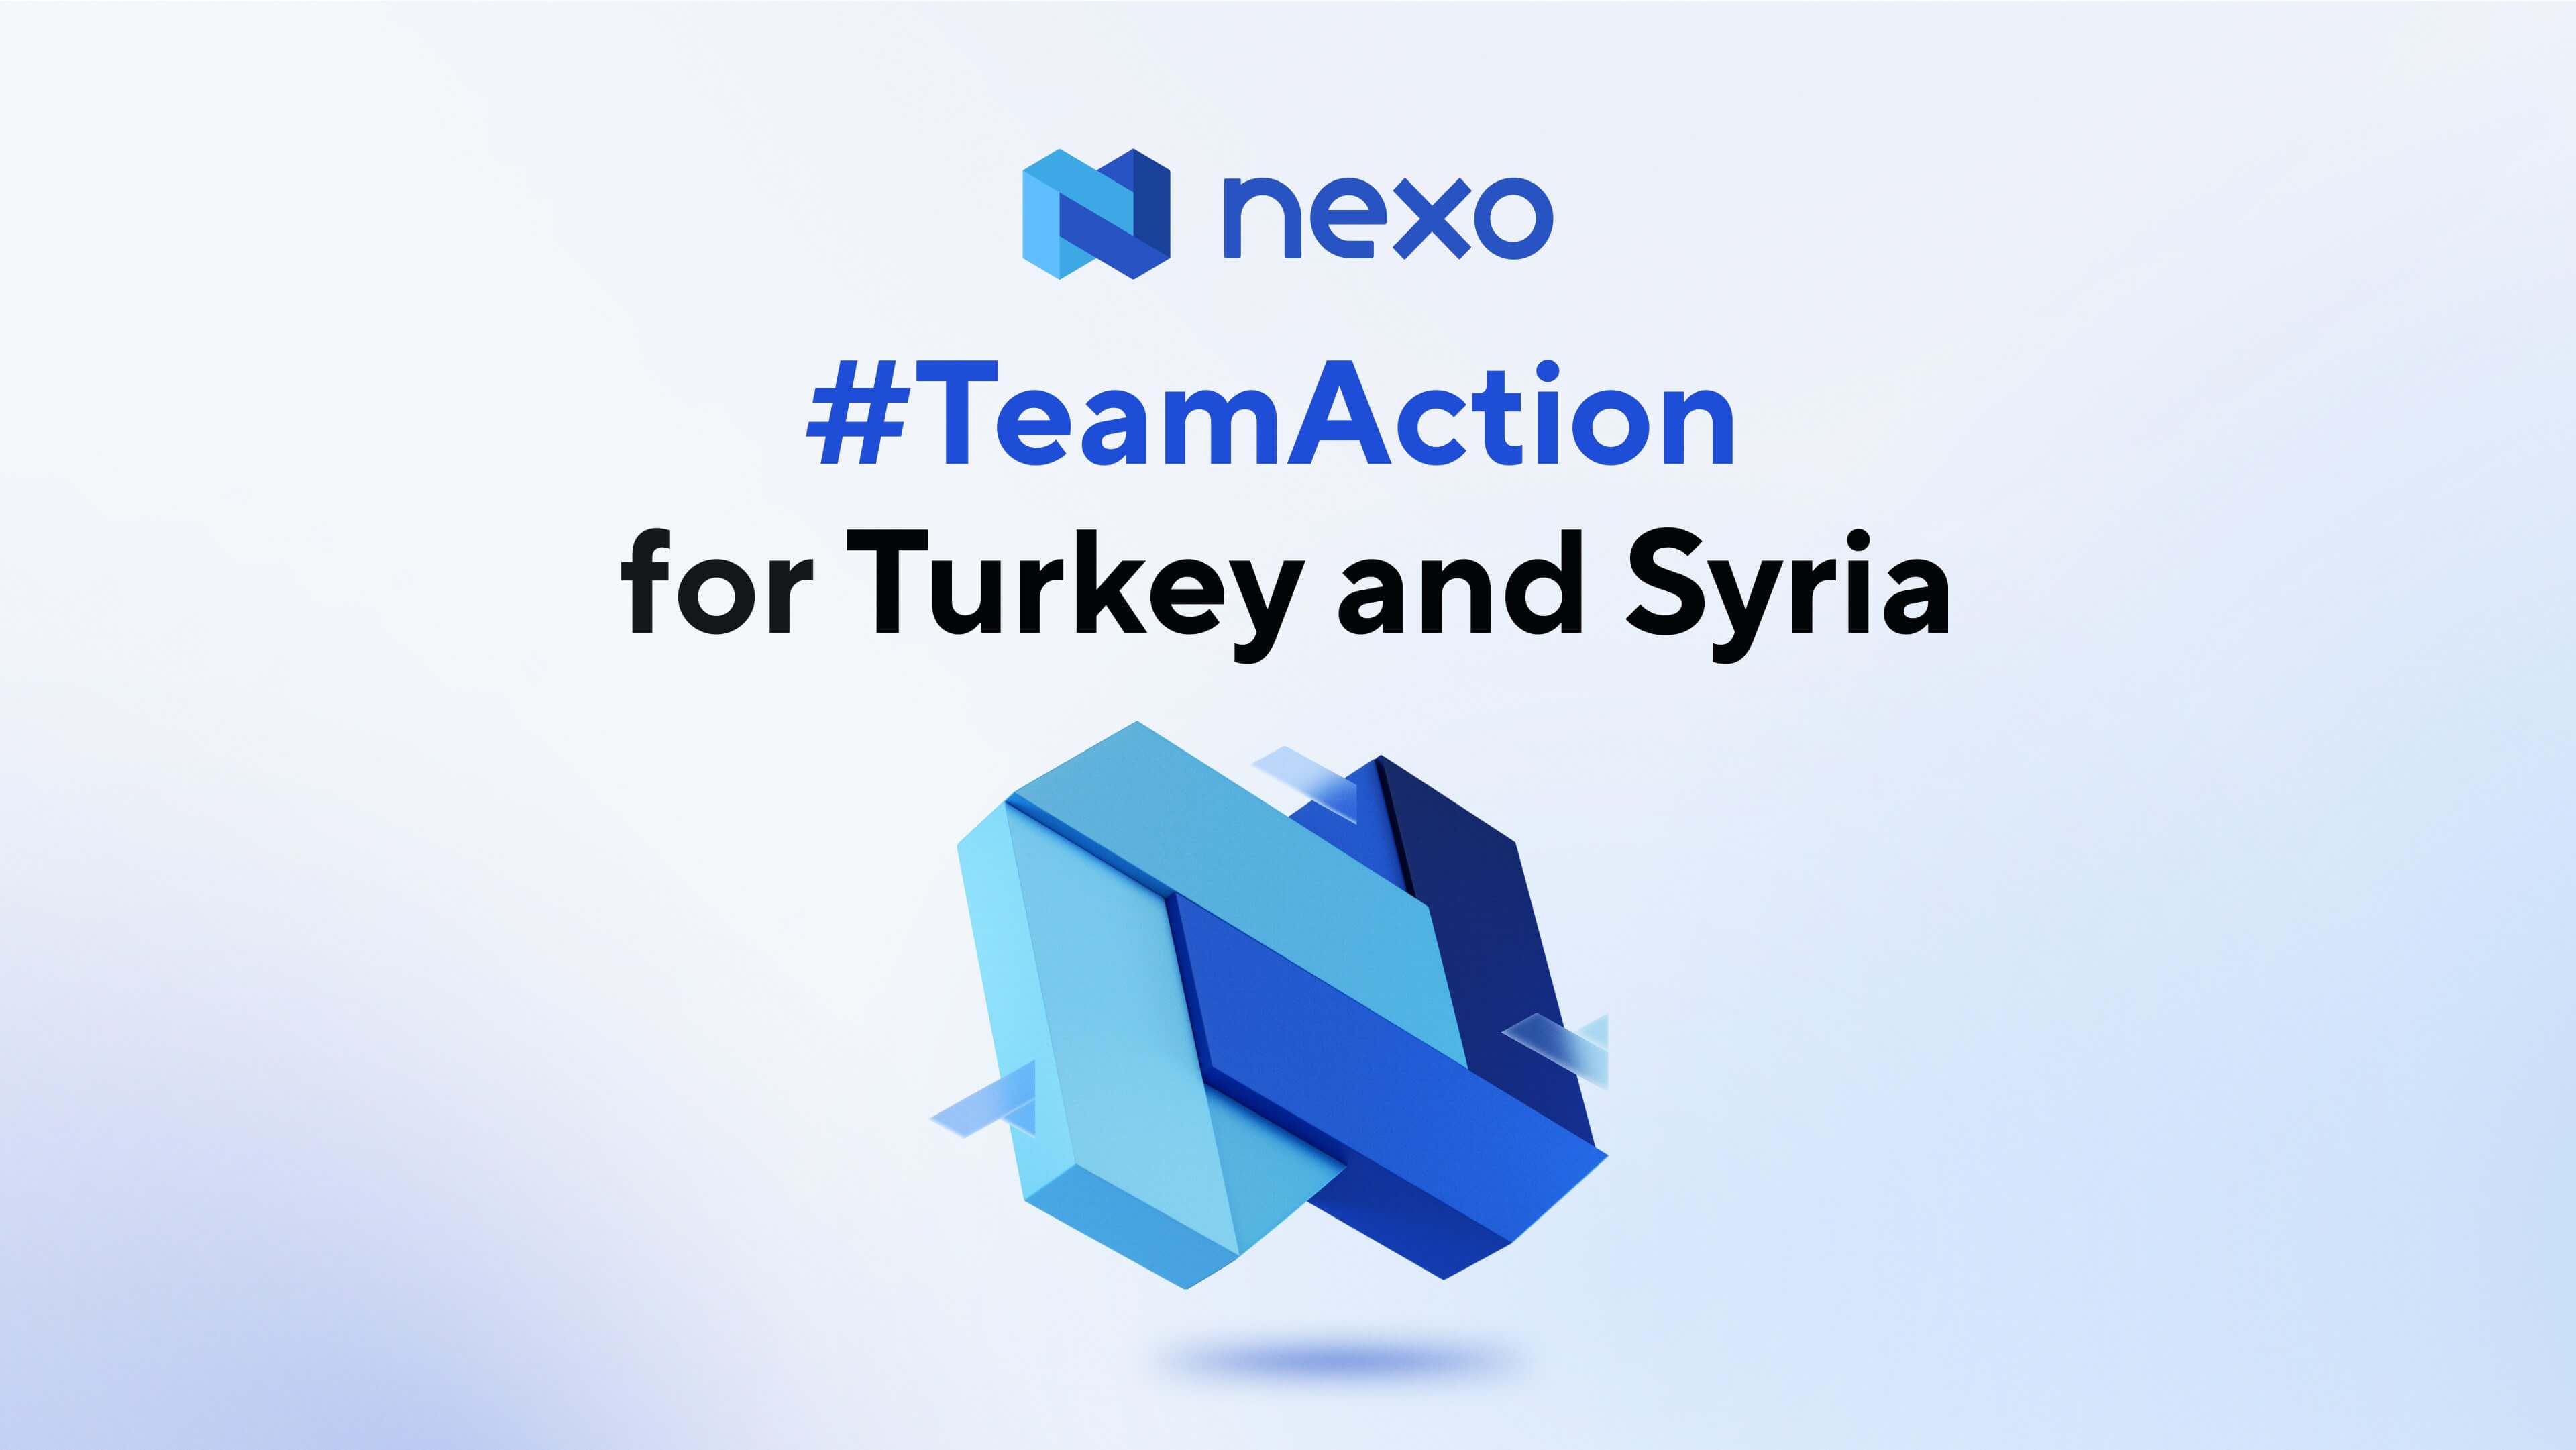 Nexo Team Provides Urgent Aid to Earthquake Victims in Turkey and Syria